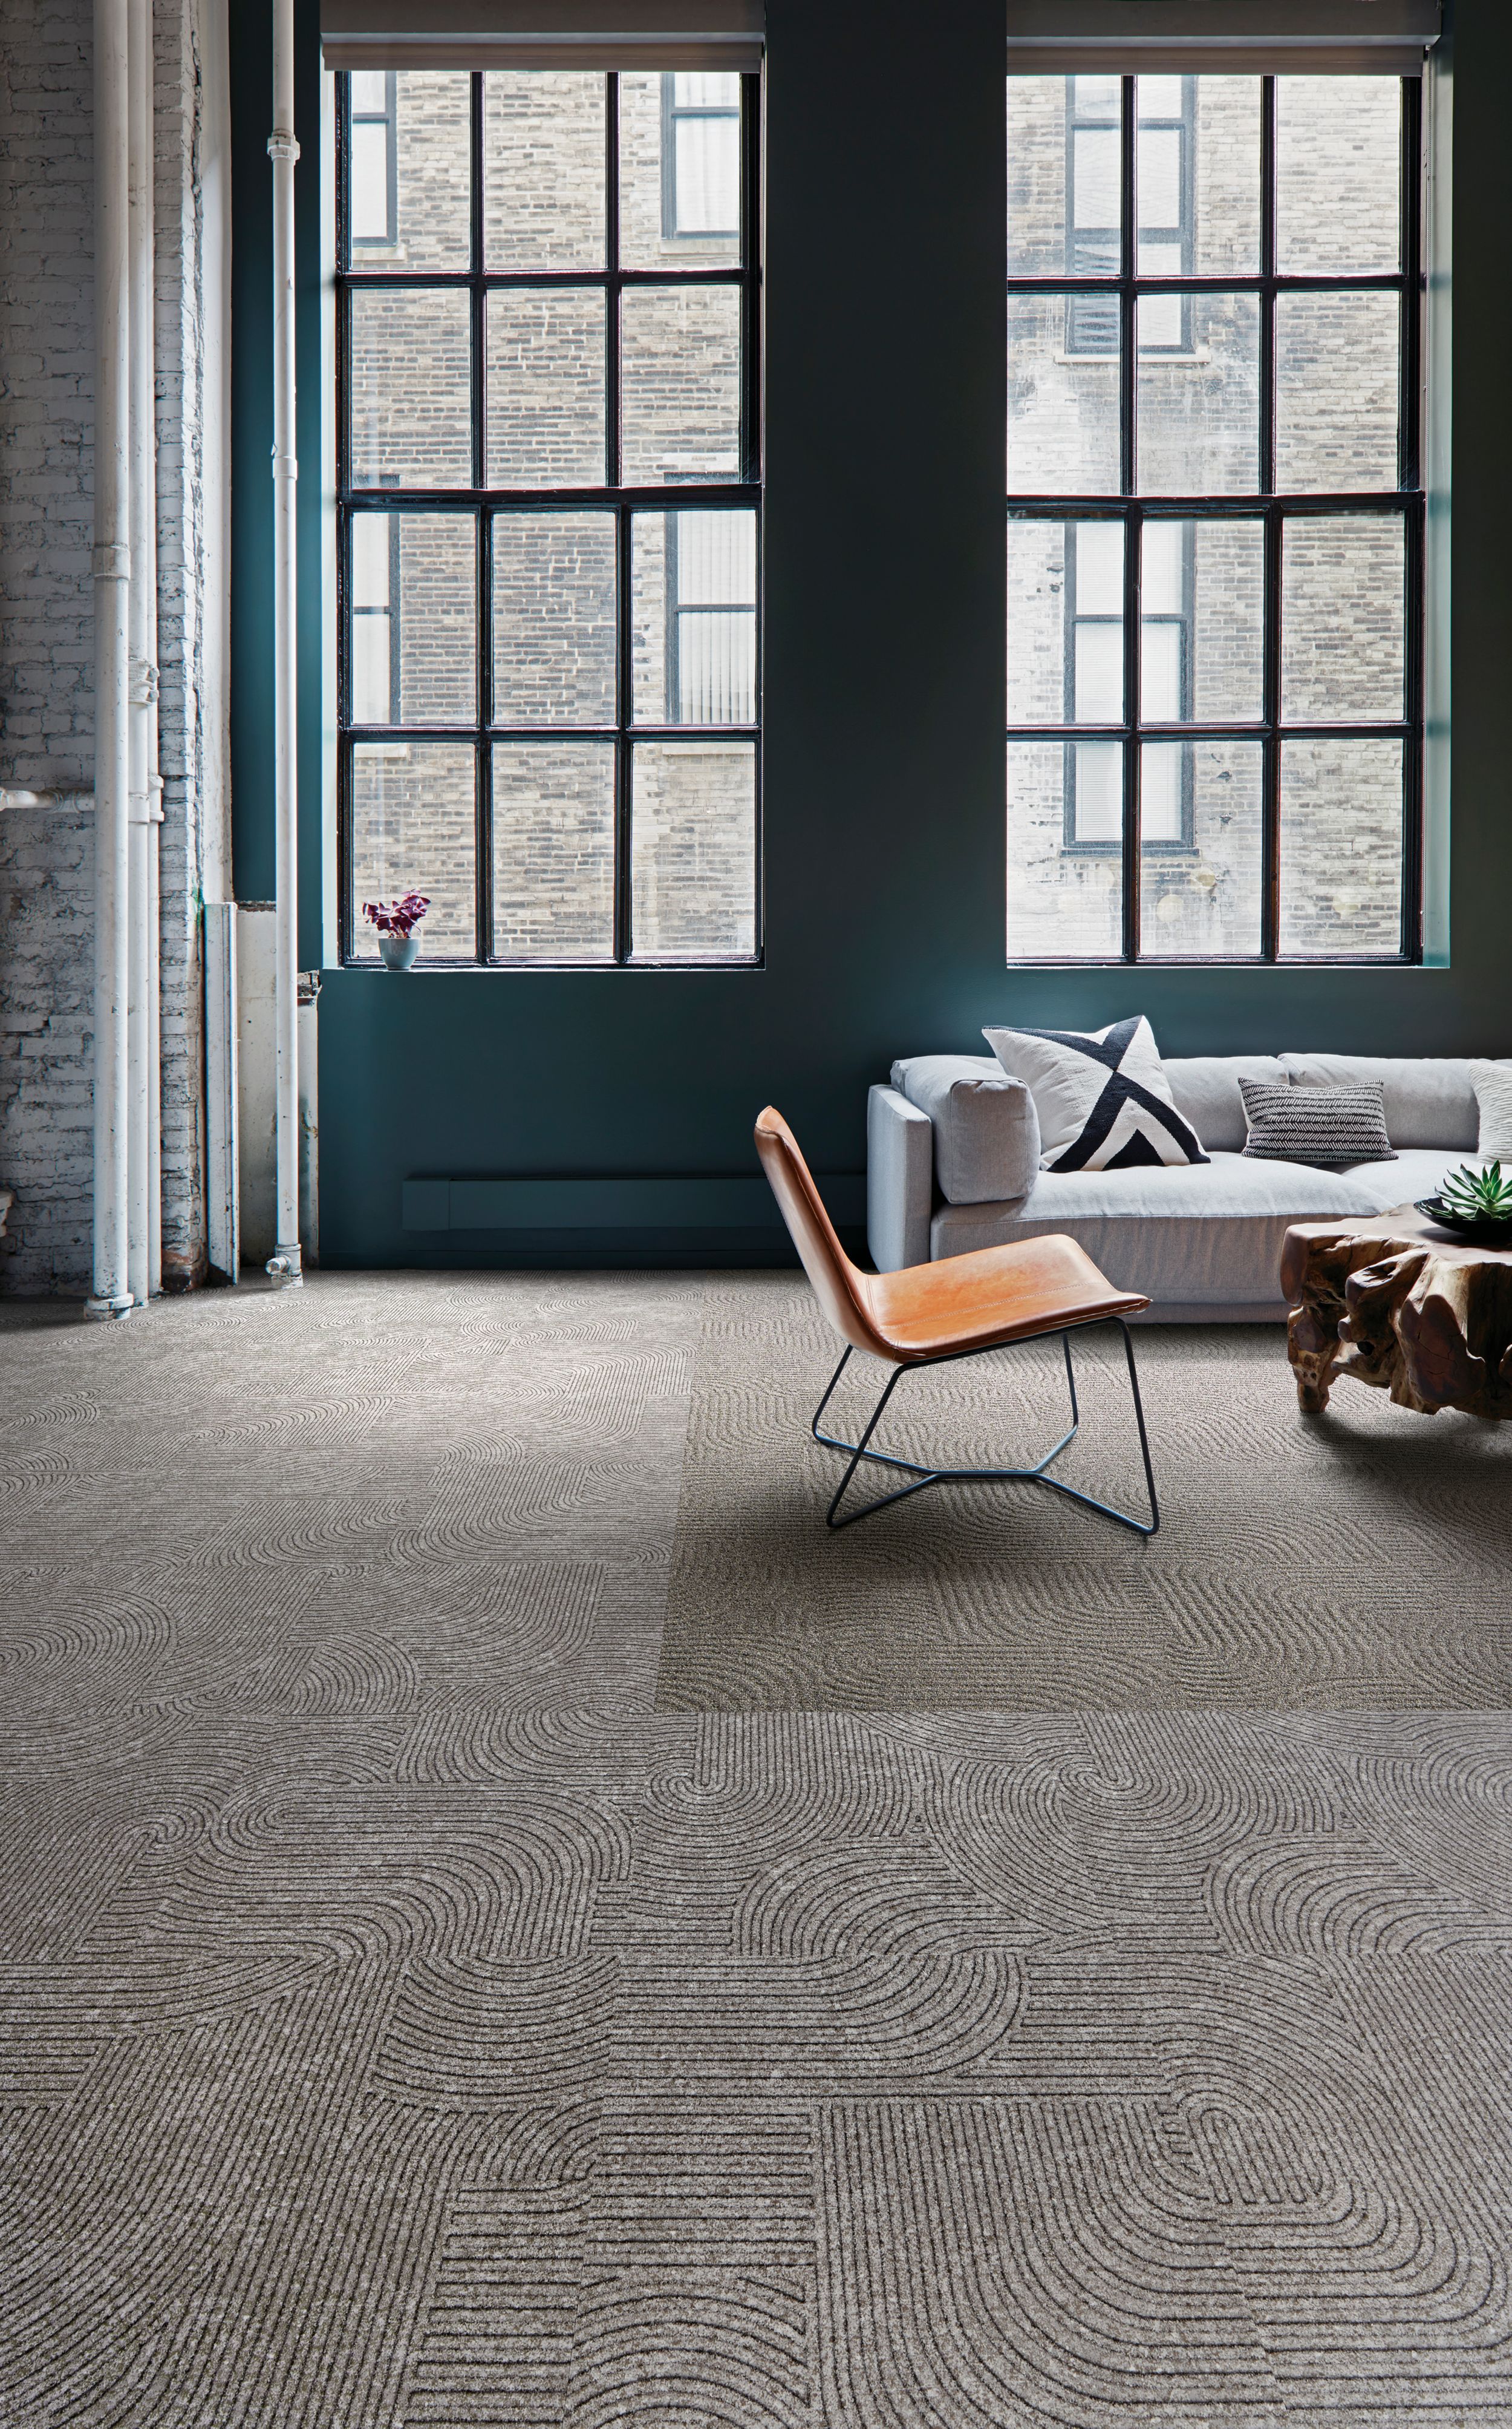 Interface Step this Way and Walk About carpet tile in seating area with couch and chair  Bildnummer 7